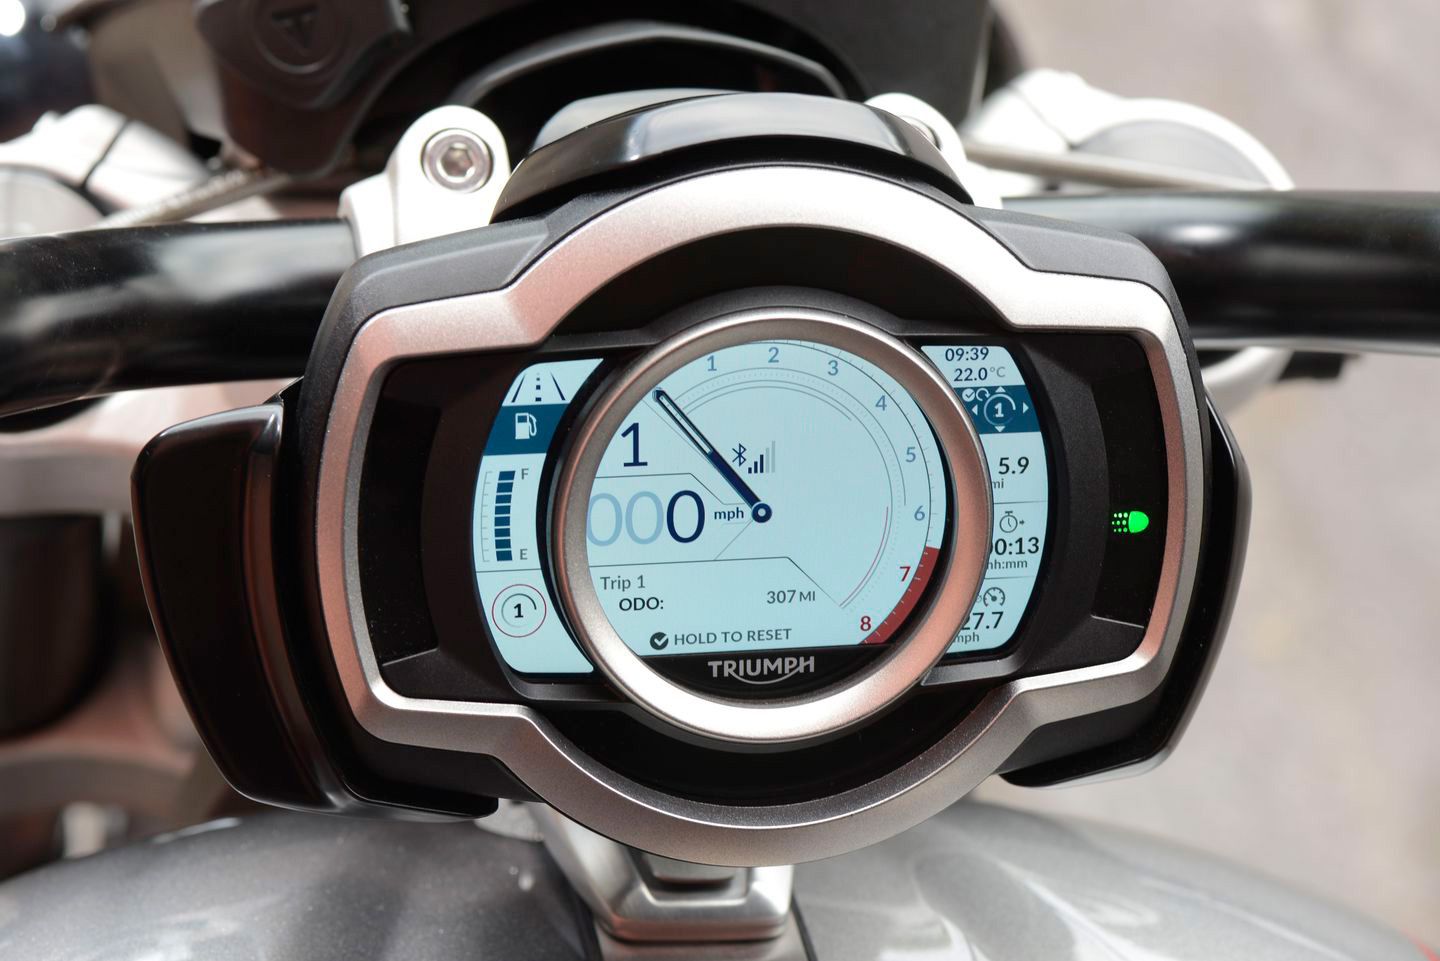 A bright and clear TFT dash makes it easy to select ride modes, and in the near future will control your GoPro and give turn-by-turn navigation.